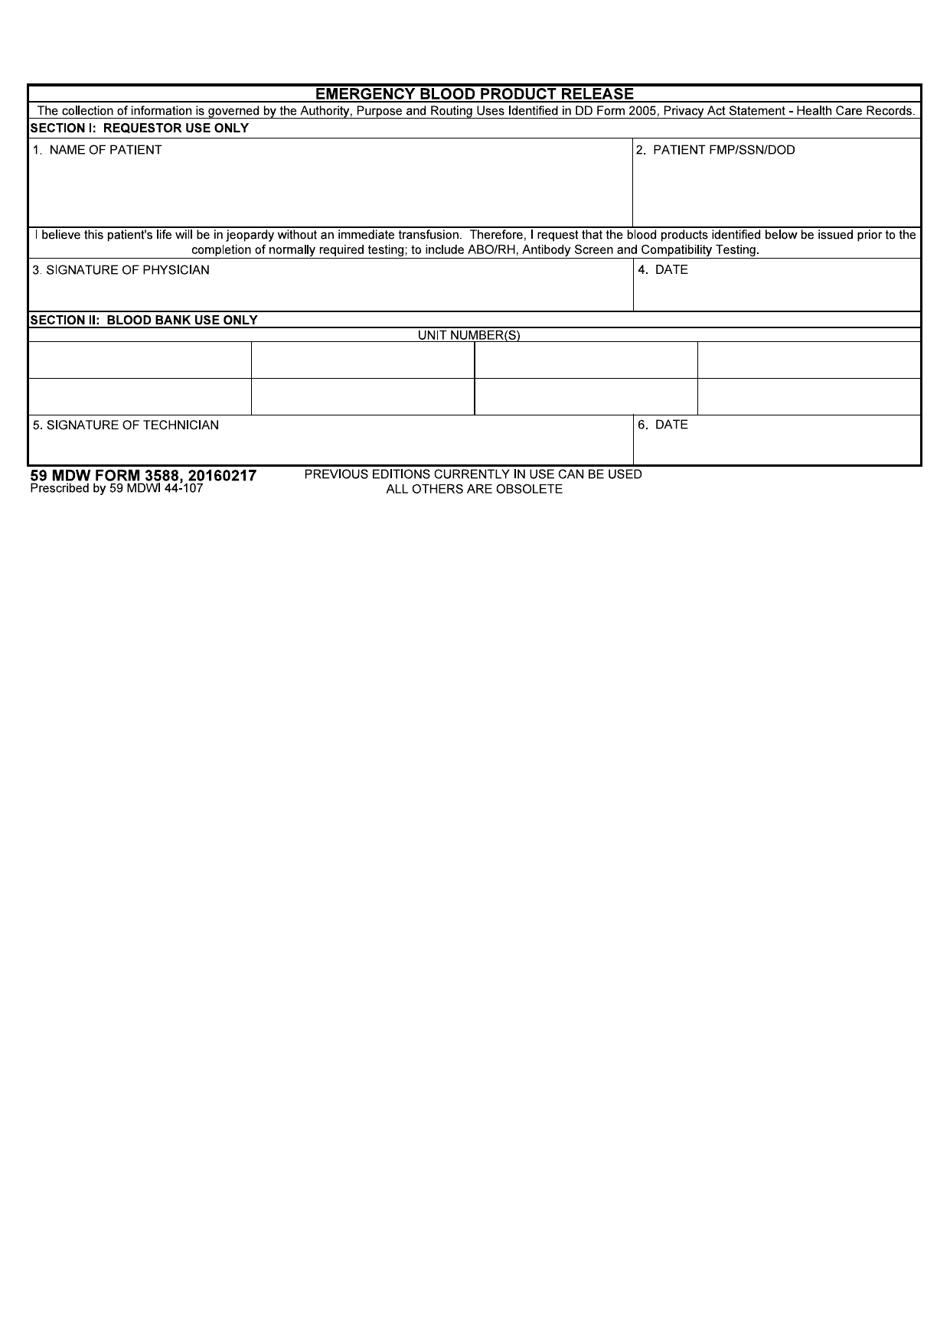 59 MDW Form 3588 Emergency Blood Product Release, Page 1